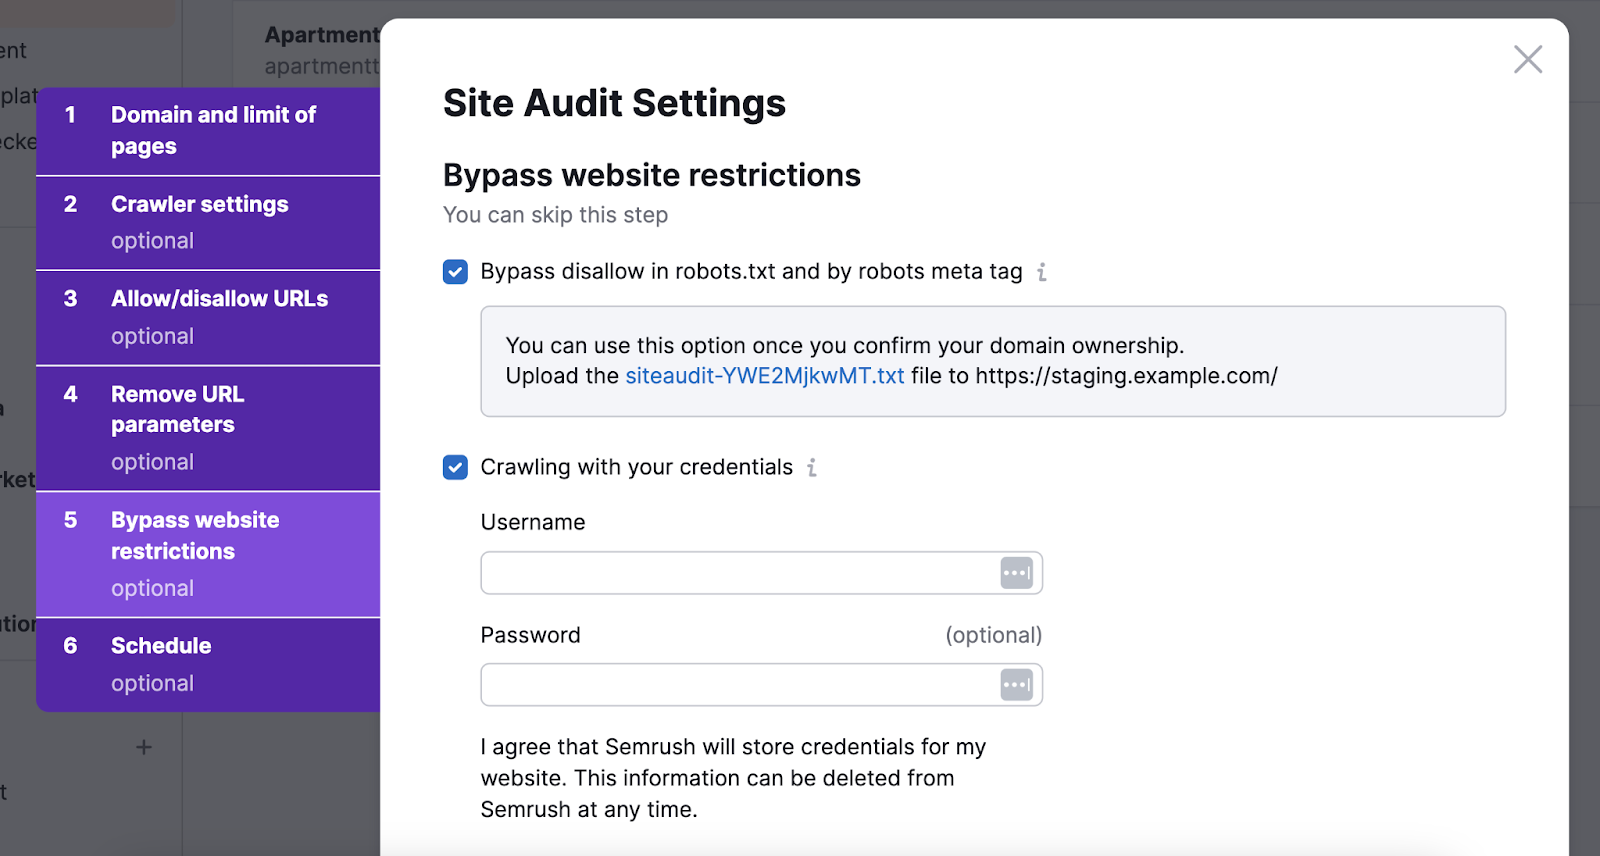 Site Audit Settings, bypass website restrictions window